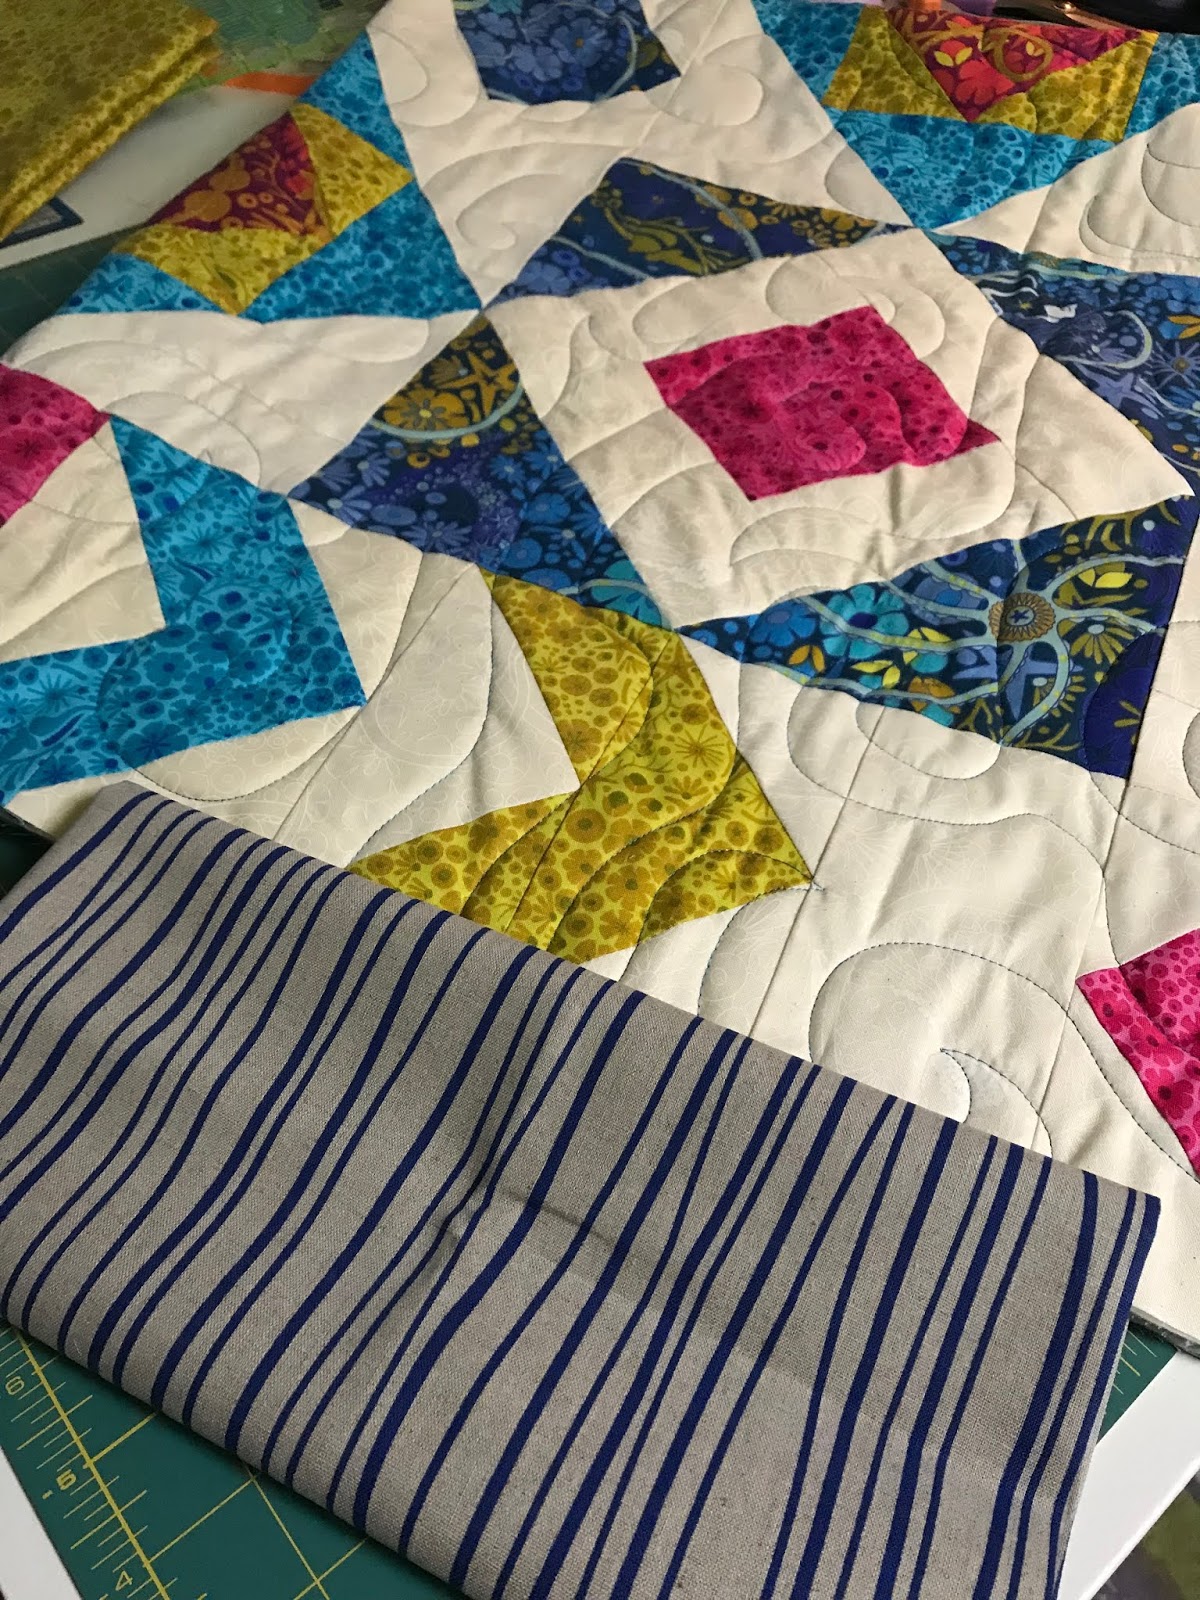 IT'S DONE! Cotton Cuts Mystery Puzzle Quilt 2.0